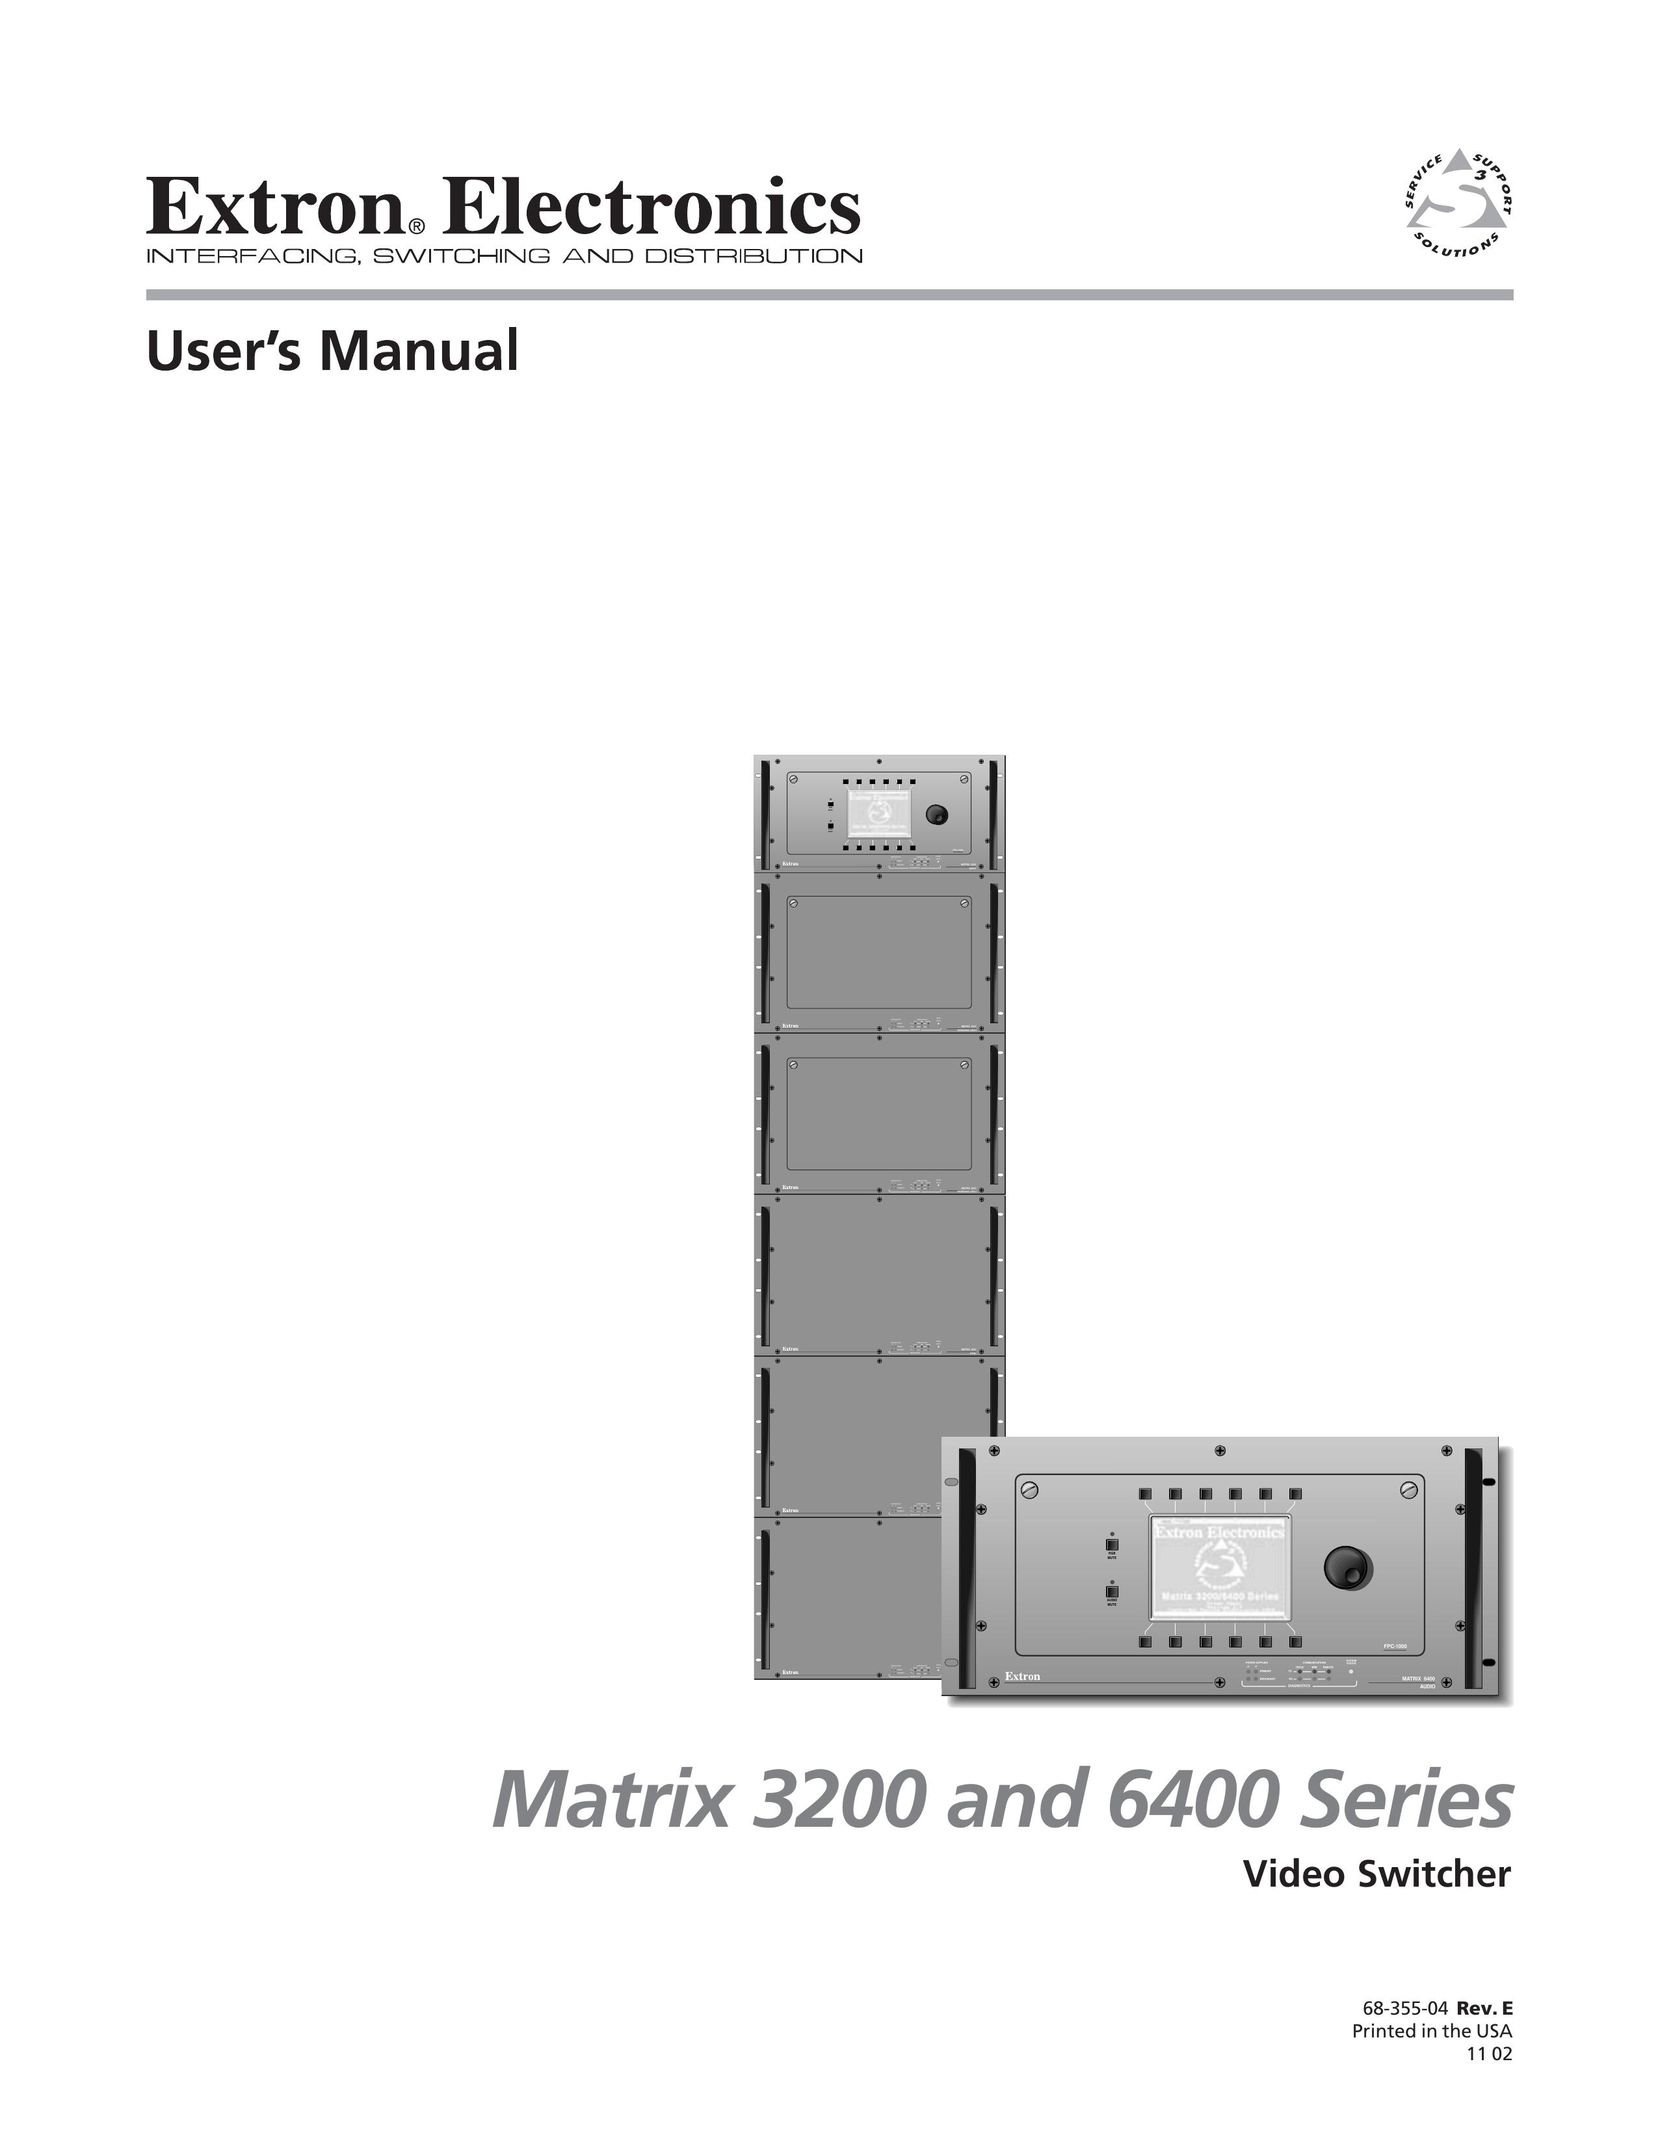 Extron electronic 6400 Series Switch User Manual